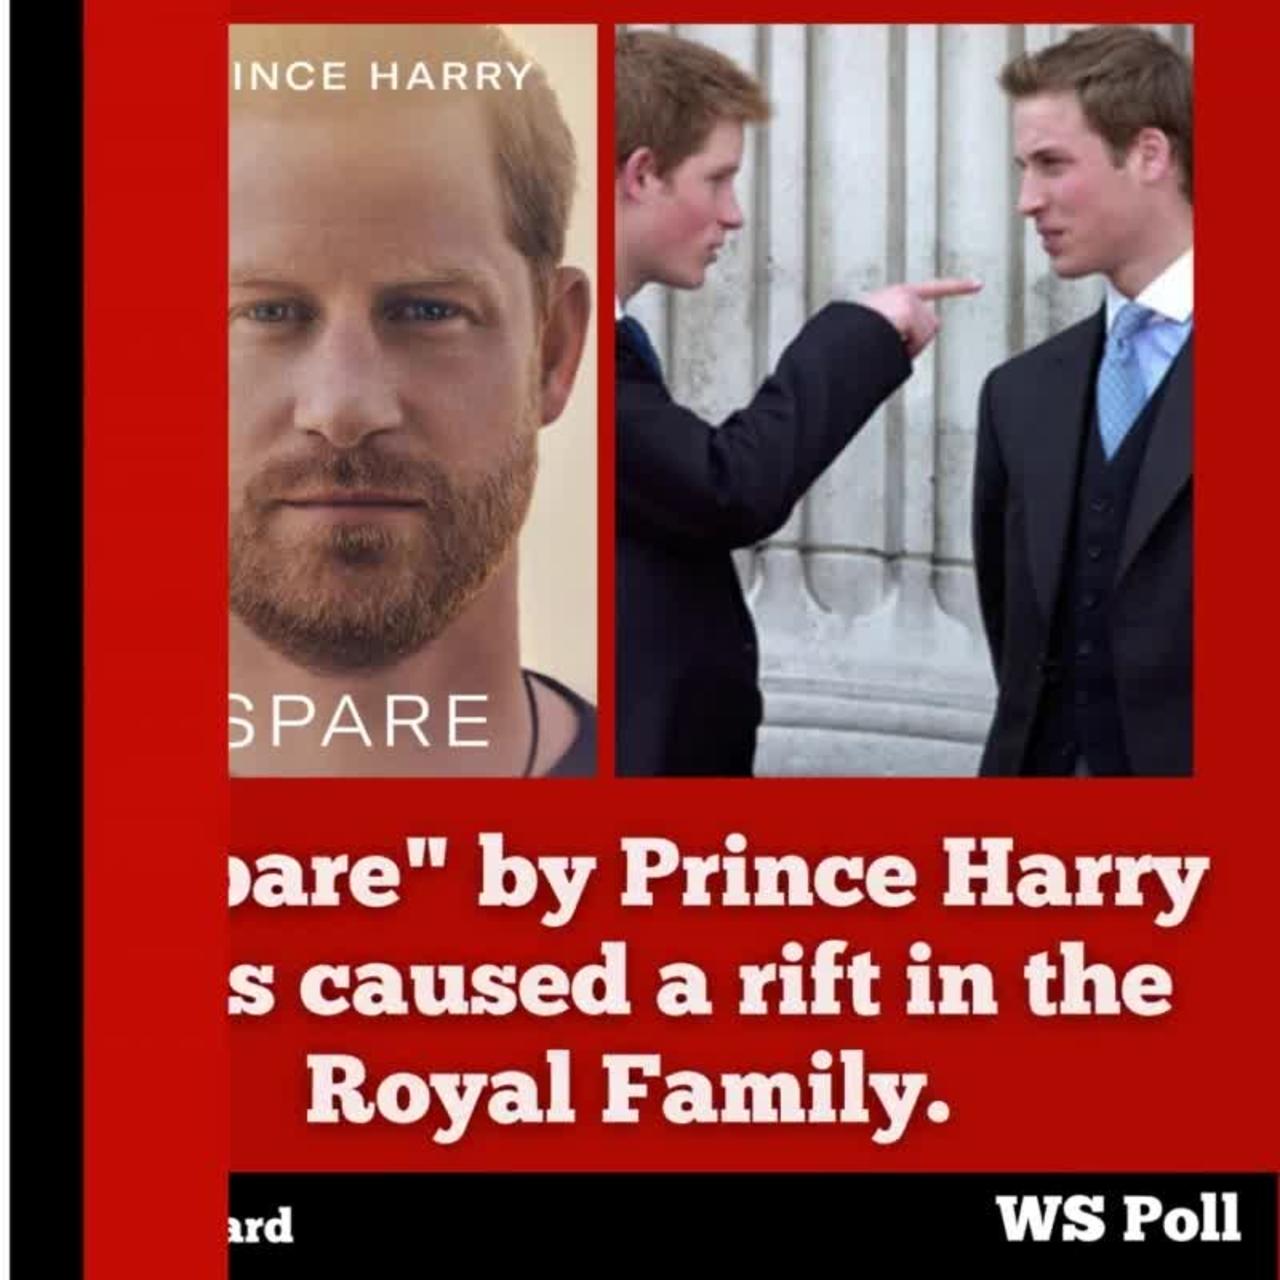 WS Poll: Which team are you on in the Royal Family feud?